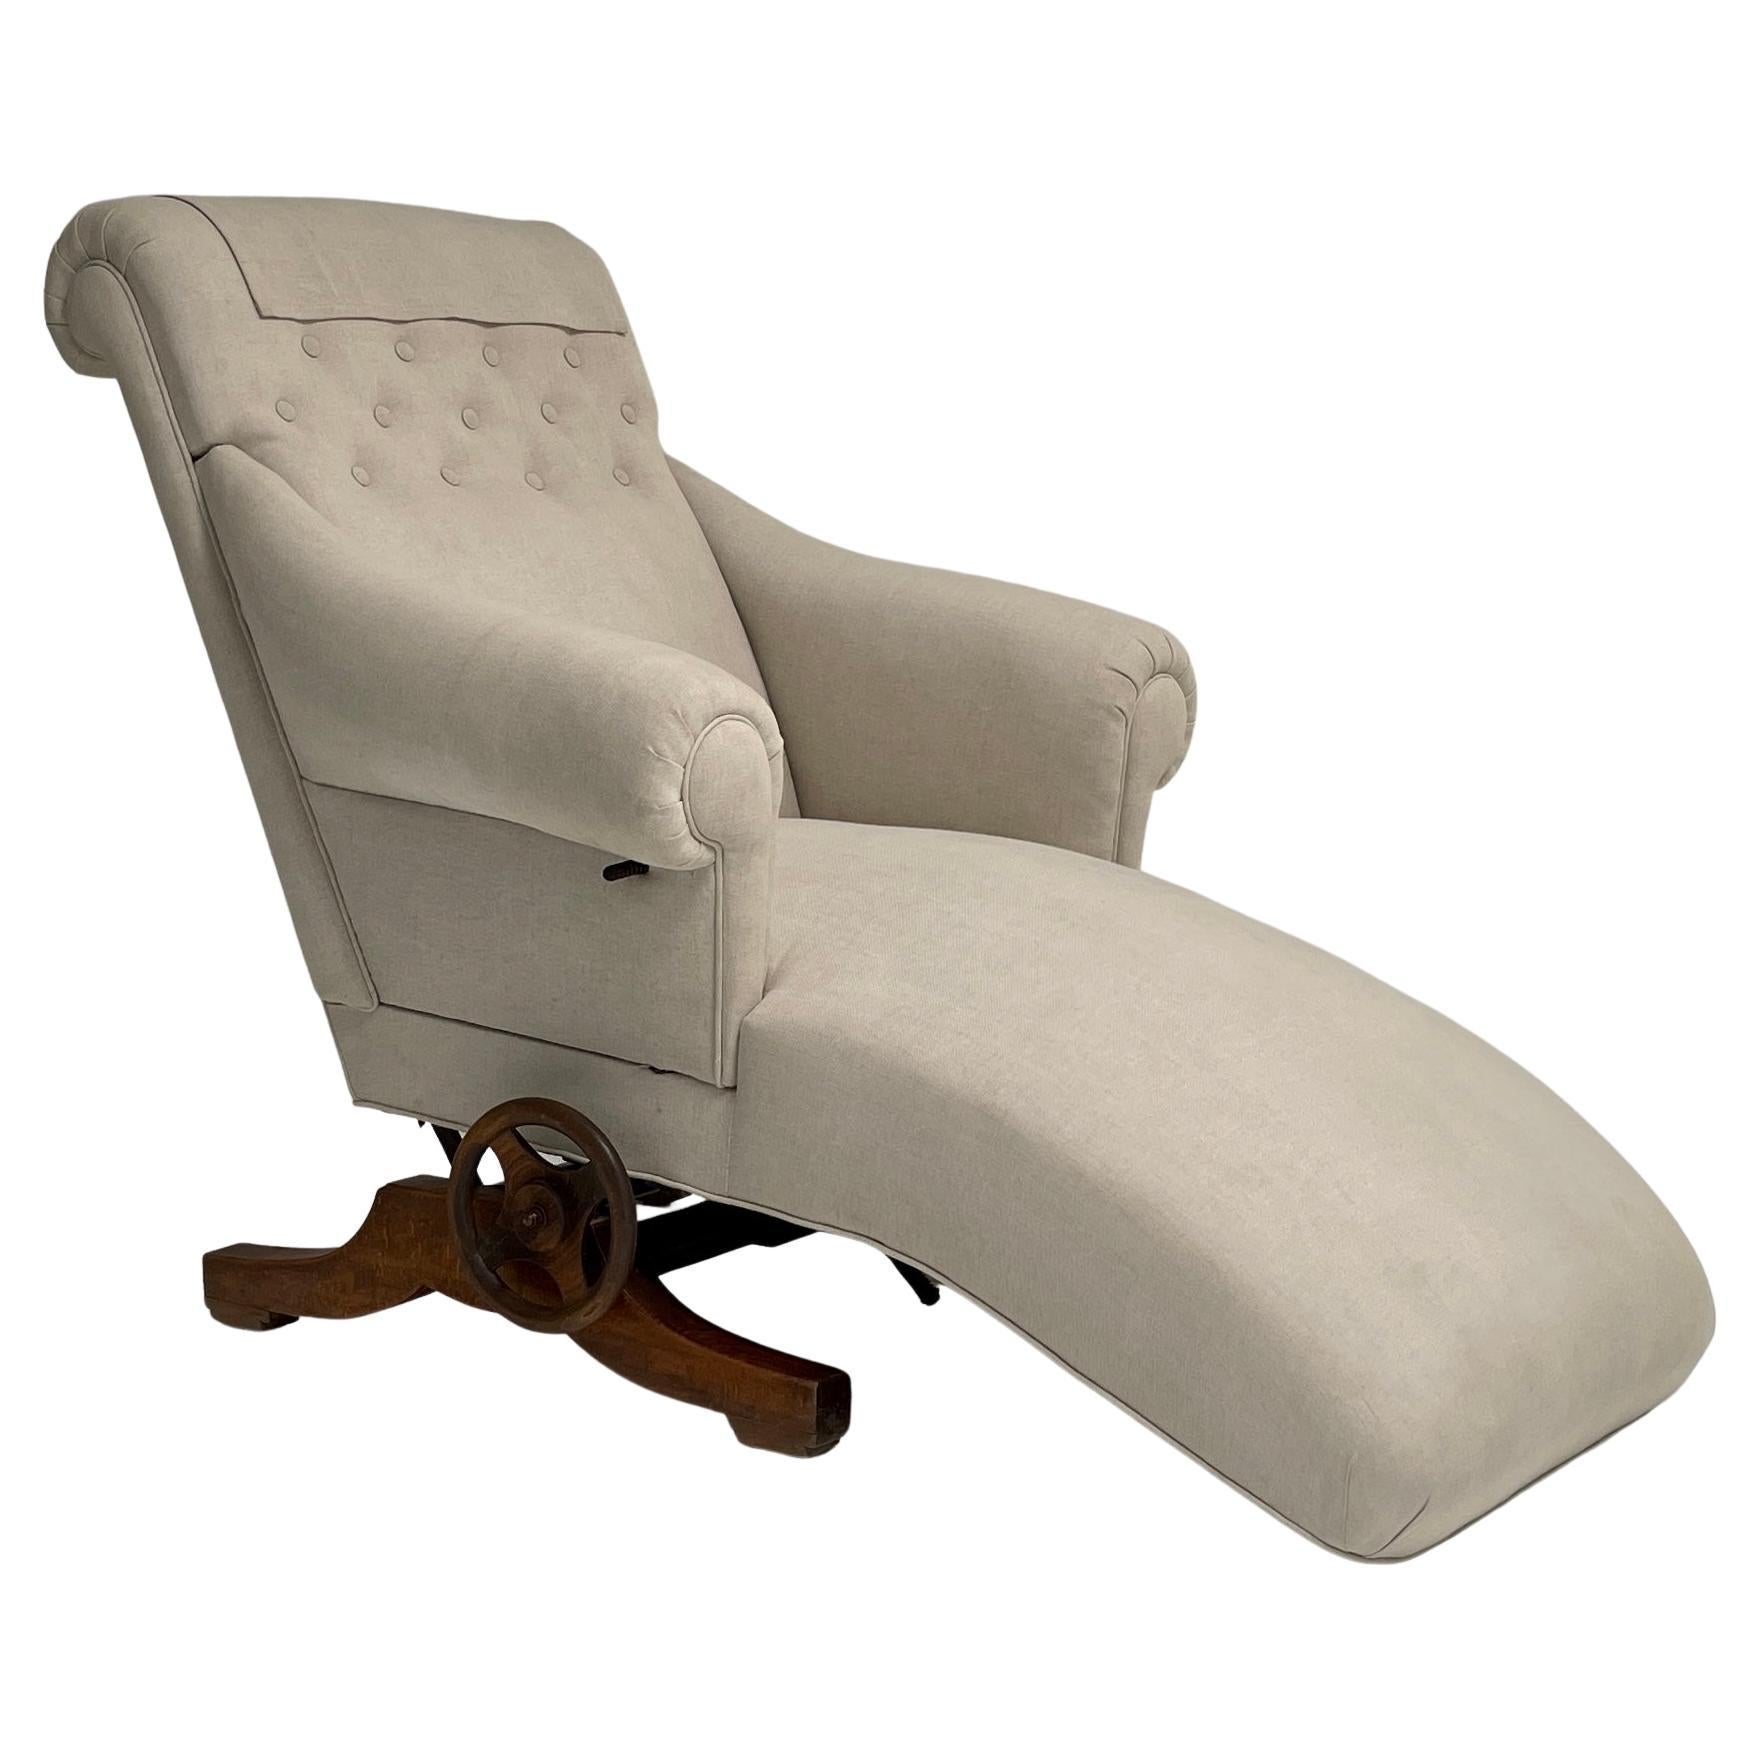 What is a chaise recliner?